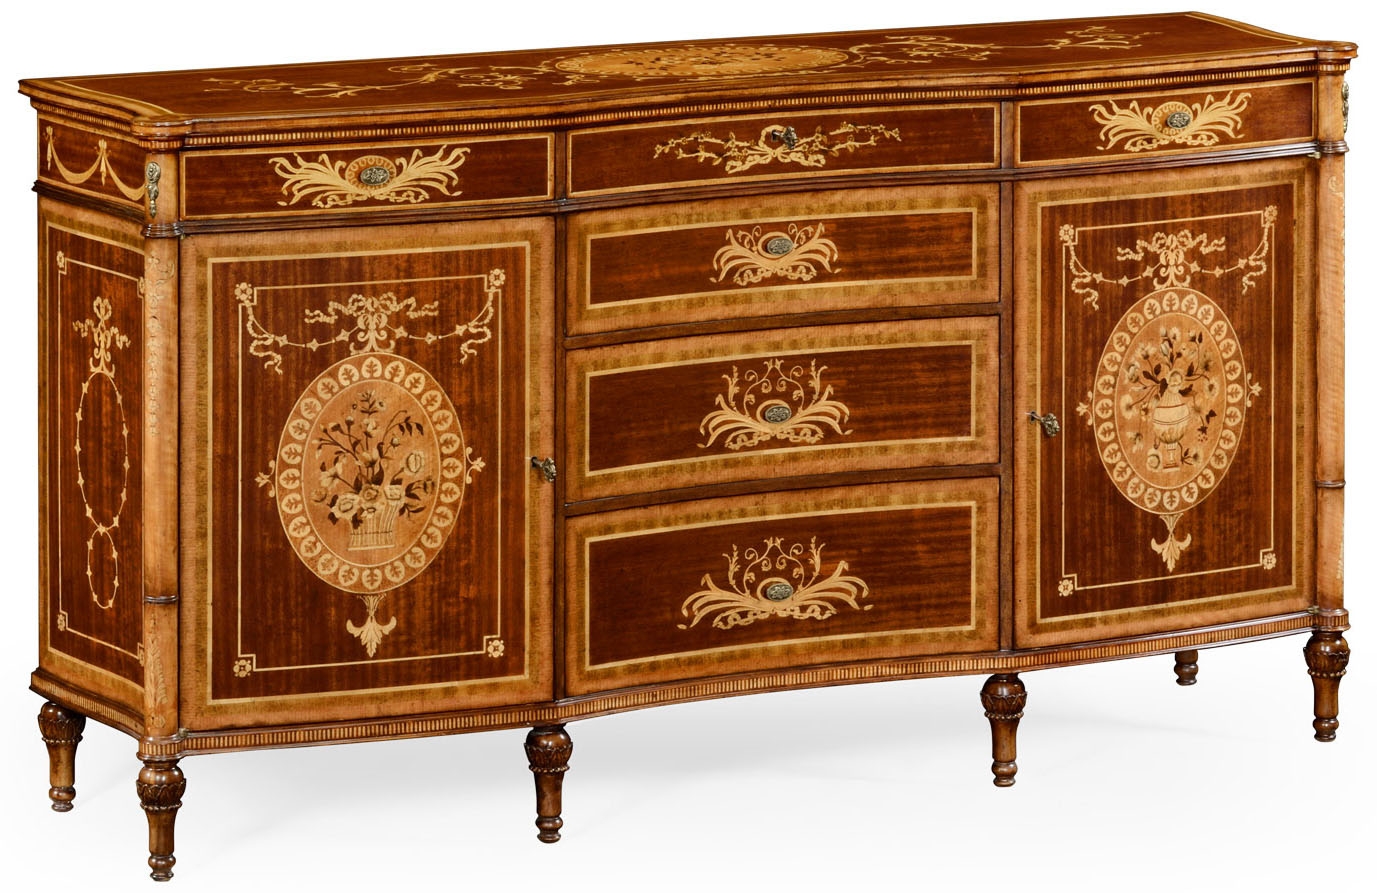 Breakfronts & China Cabinets Fine mahogany sideboard with floral marquetry inlays